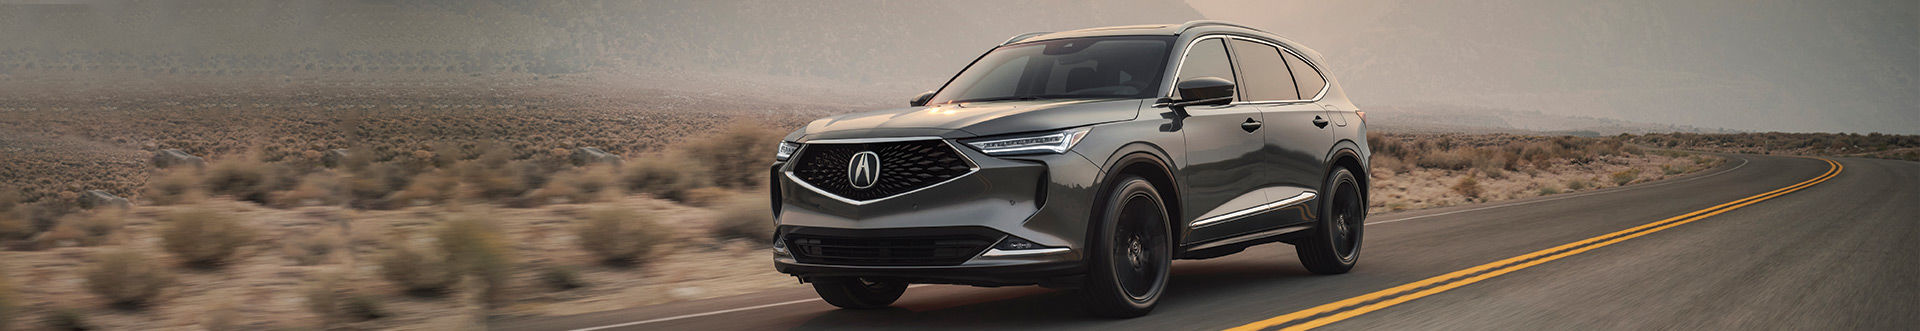 the all-new 2022 Acura mdx